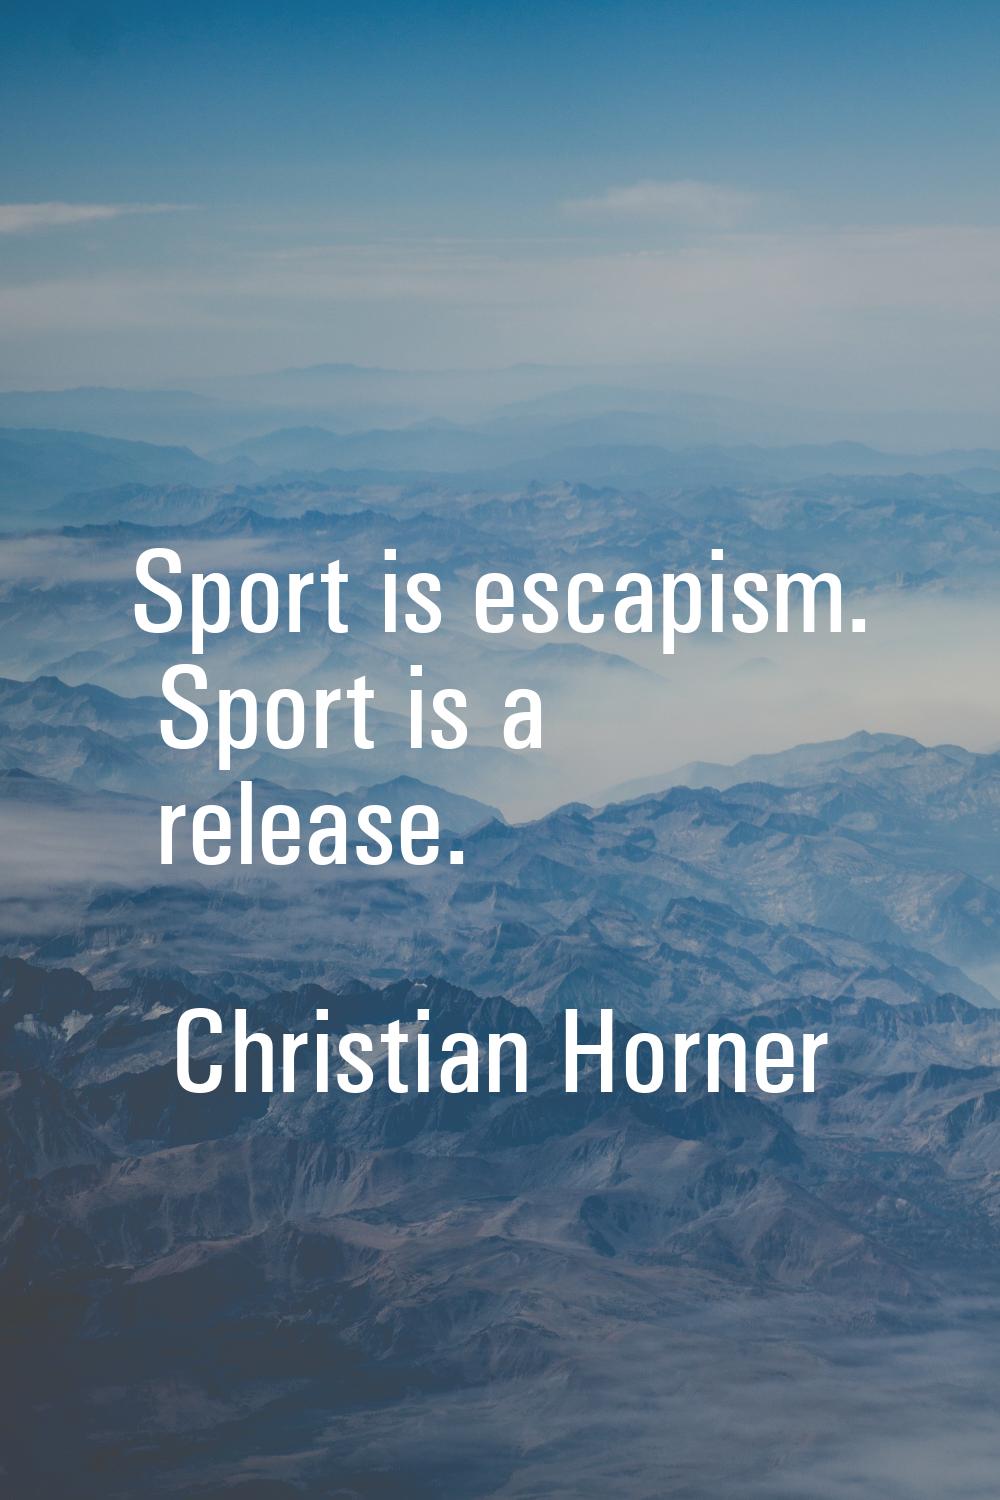 Sport is escapism. Sport is a release.